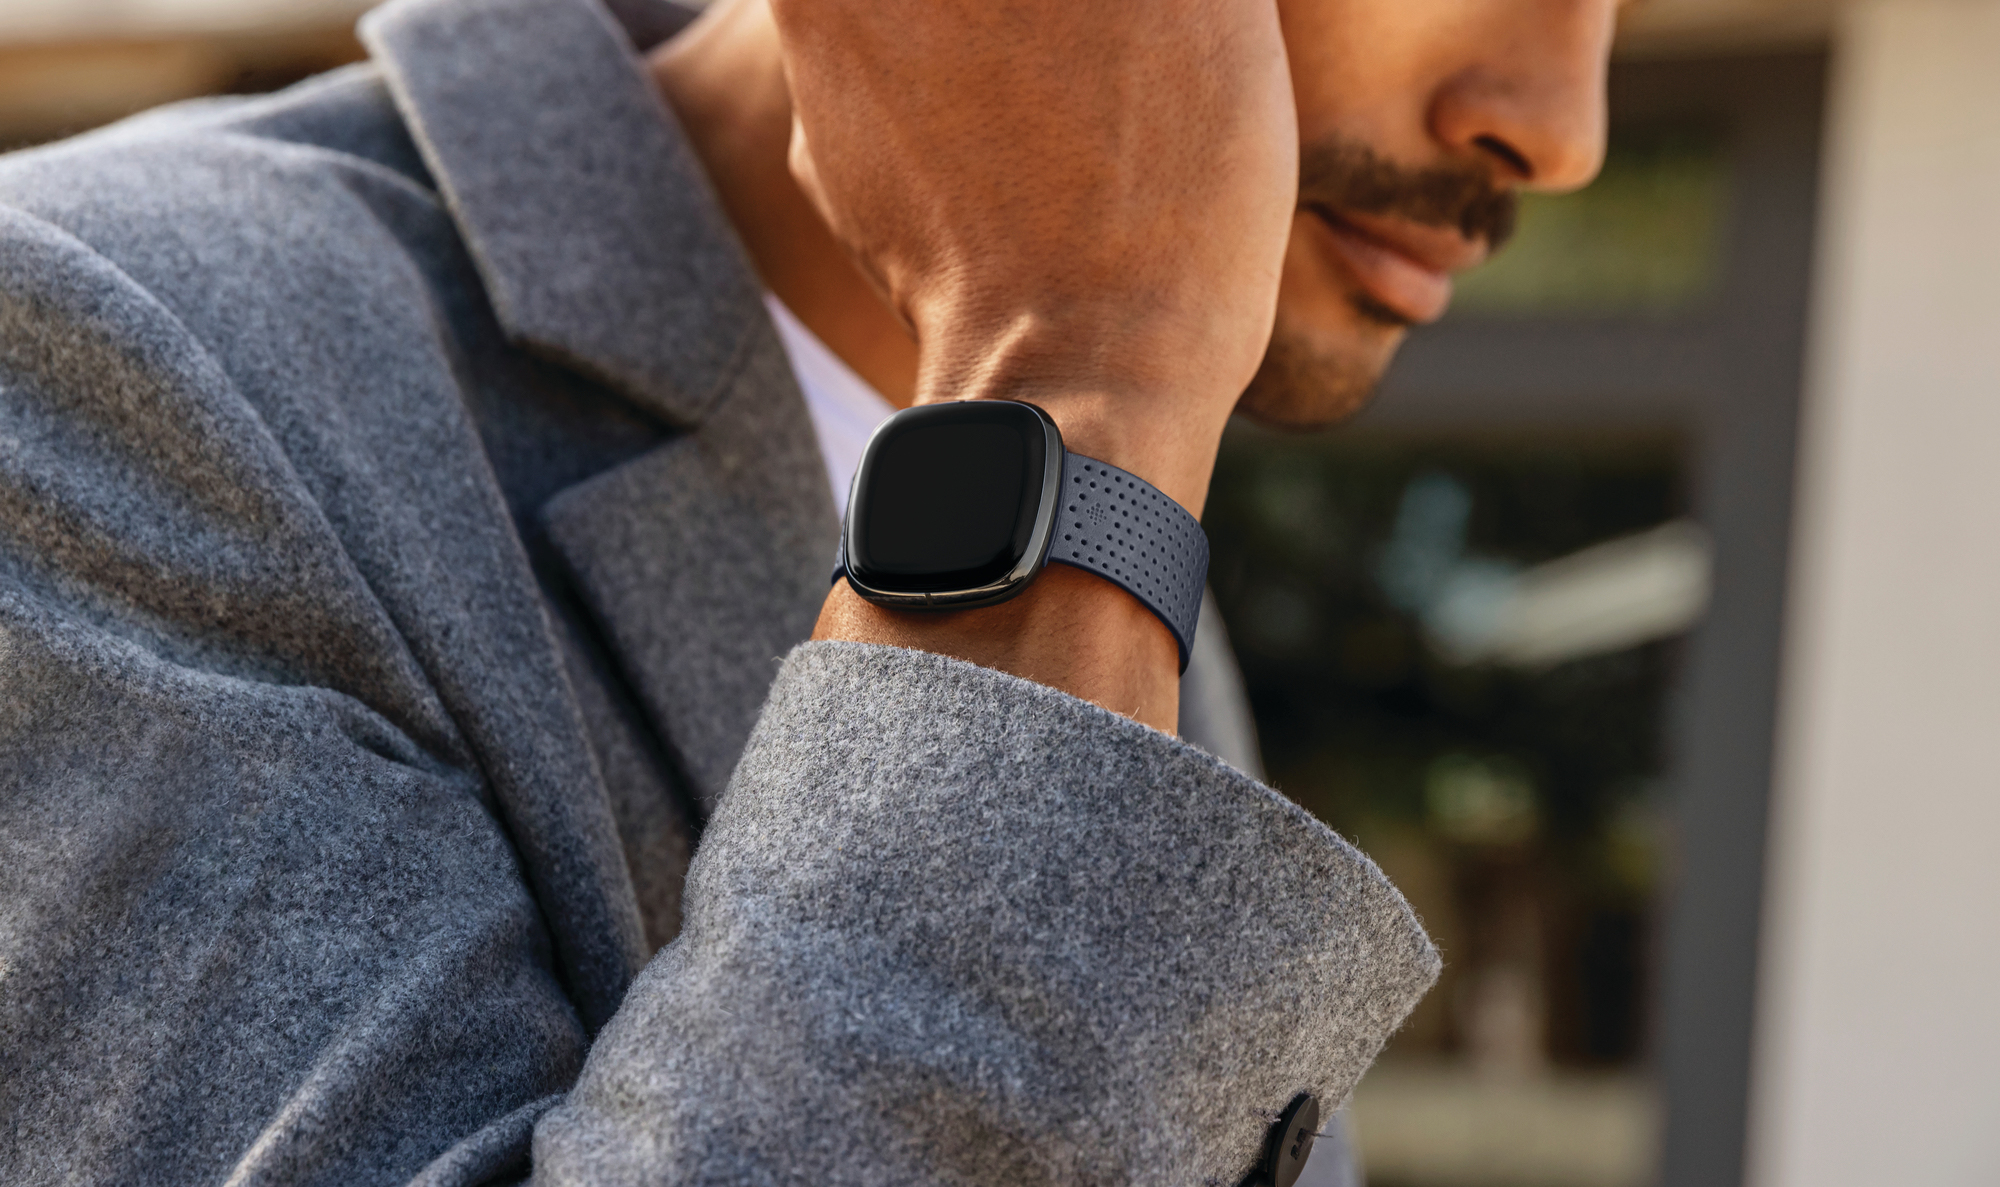 new fitbit devices